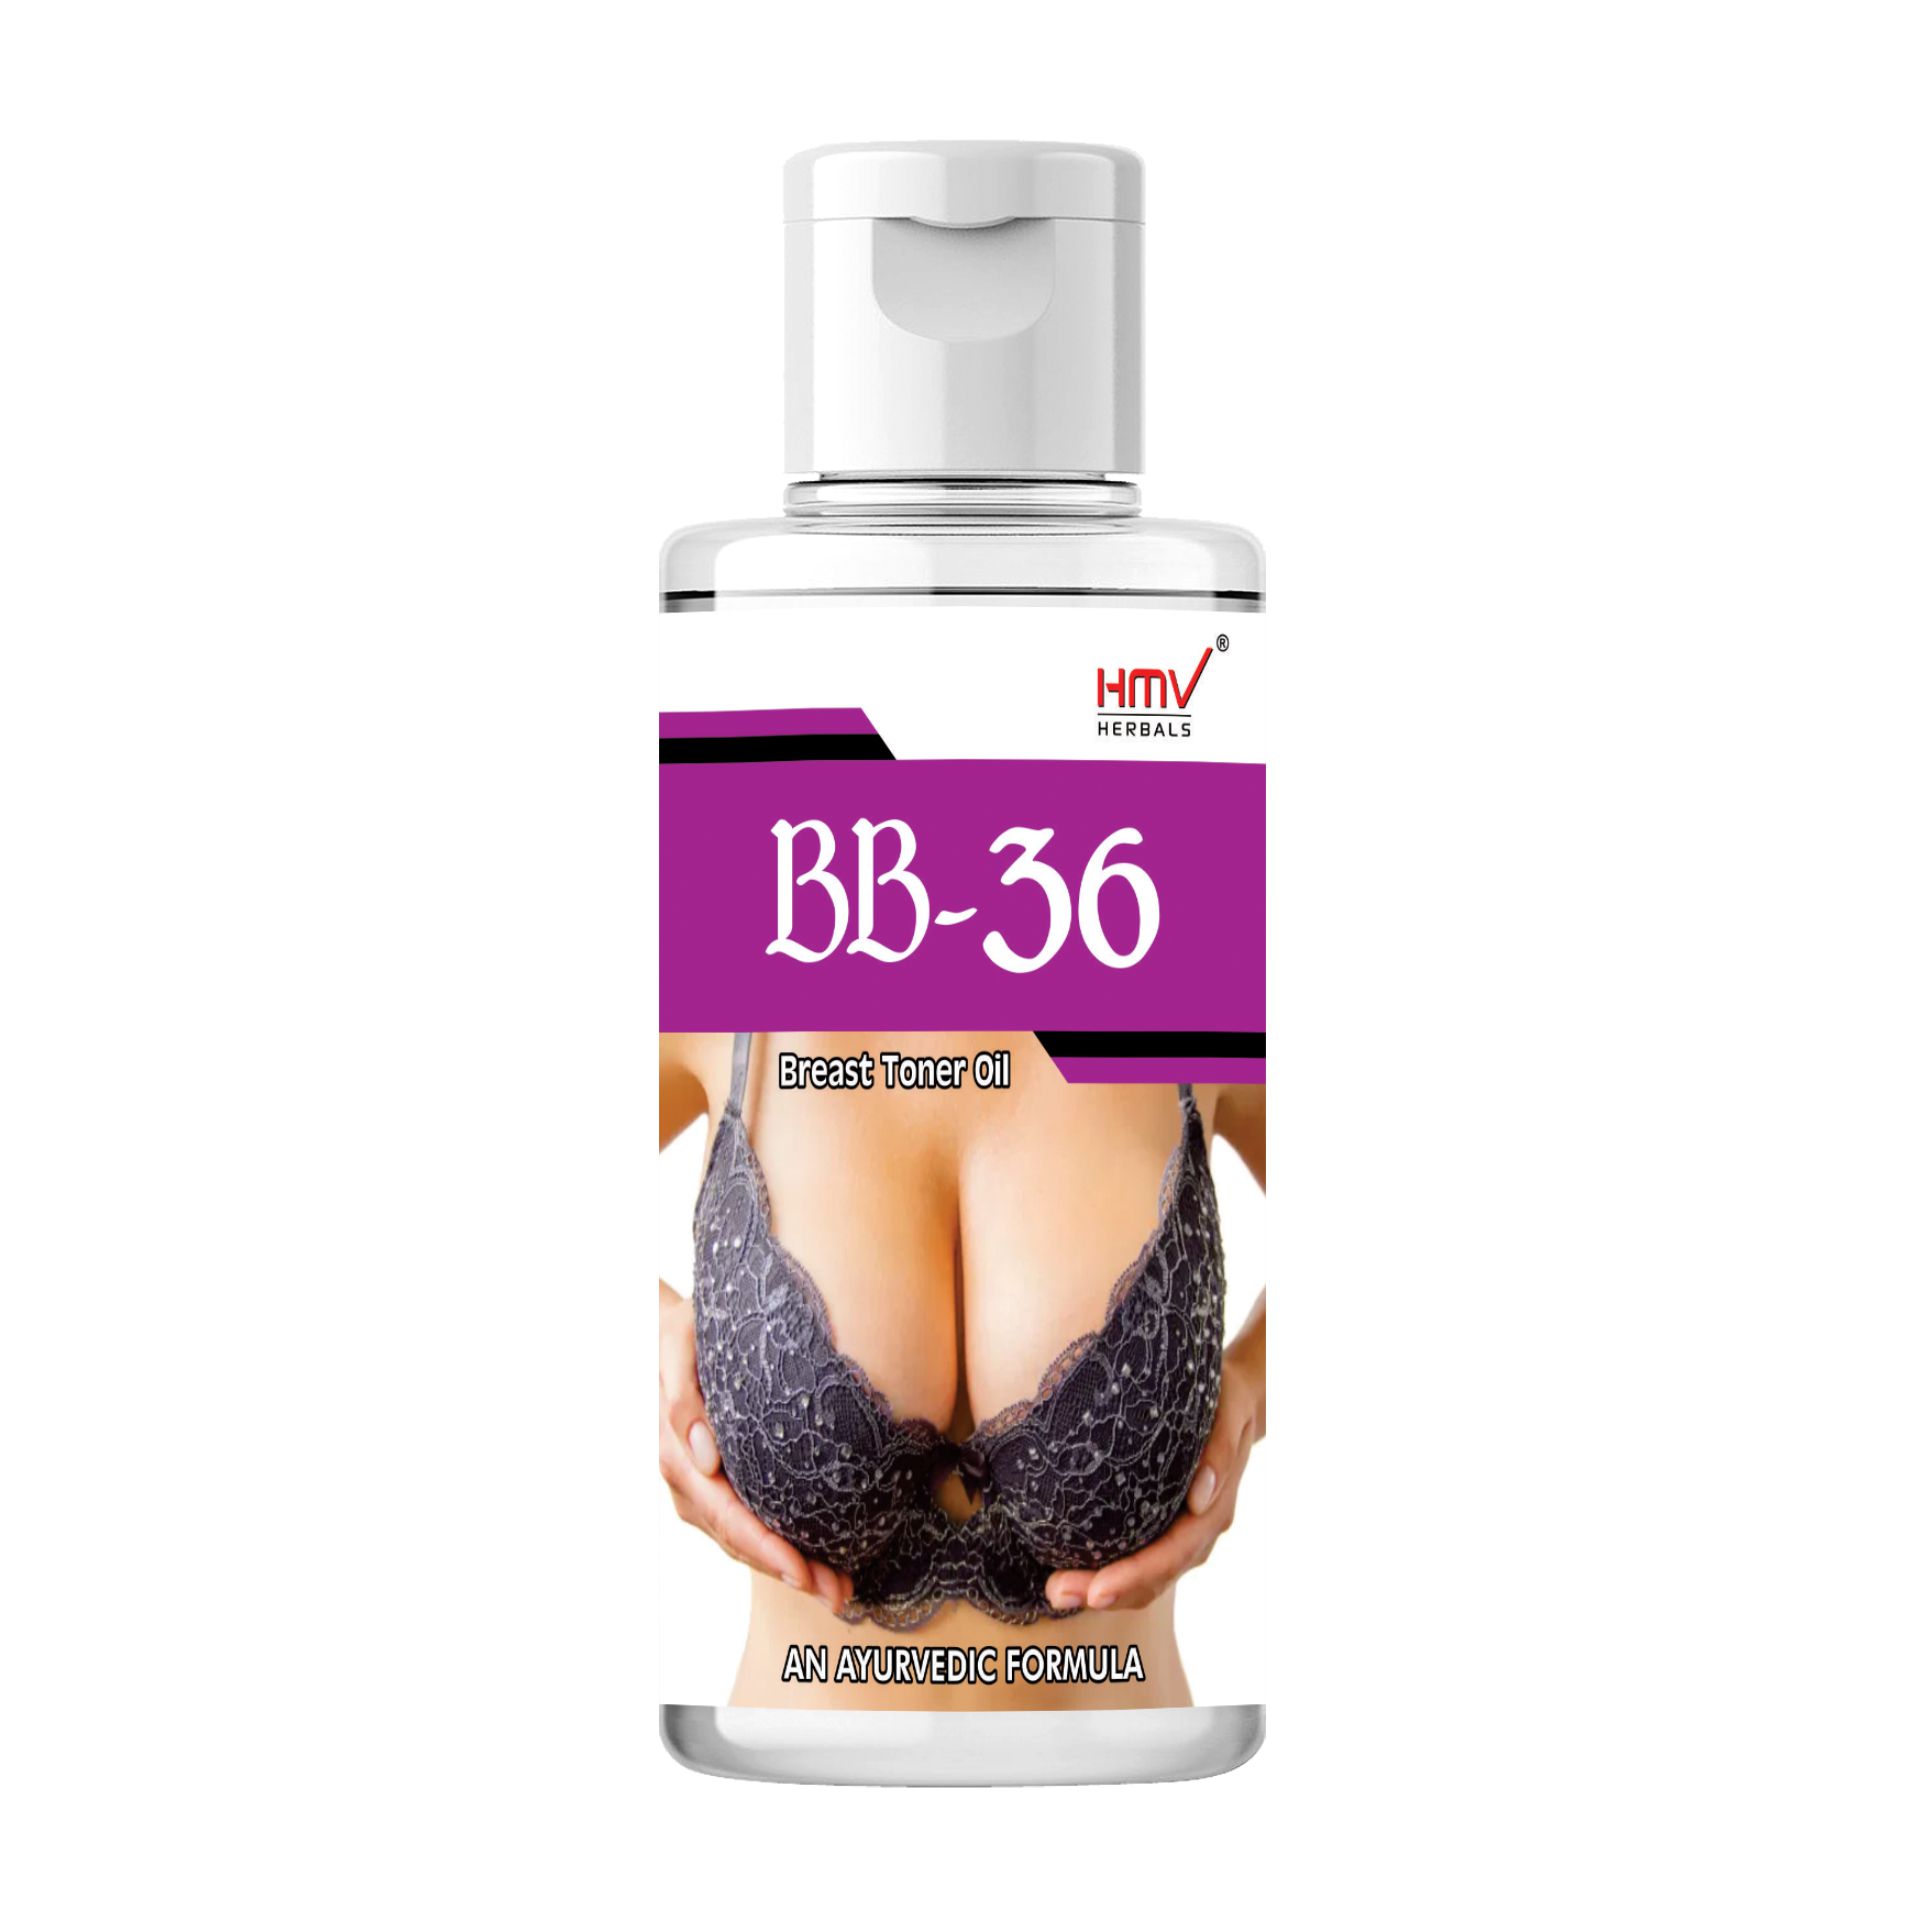 Herbals BB-36 Bust Firming Oil for Women Pack Of 1